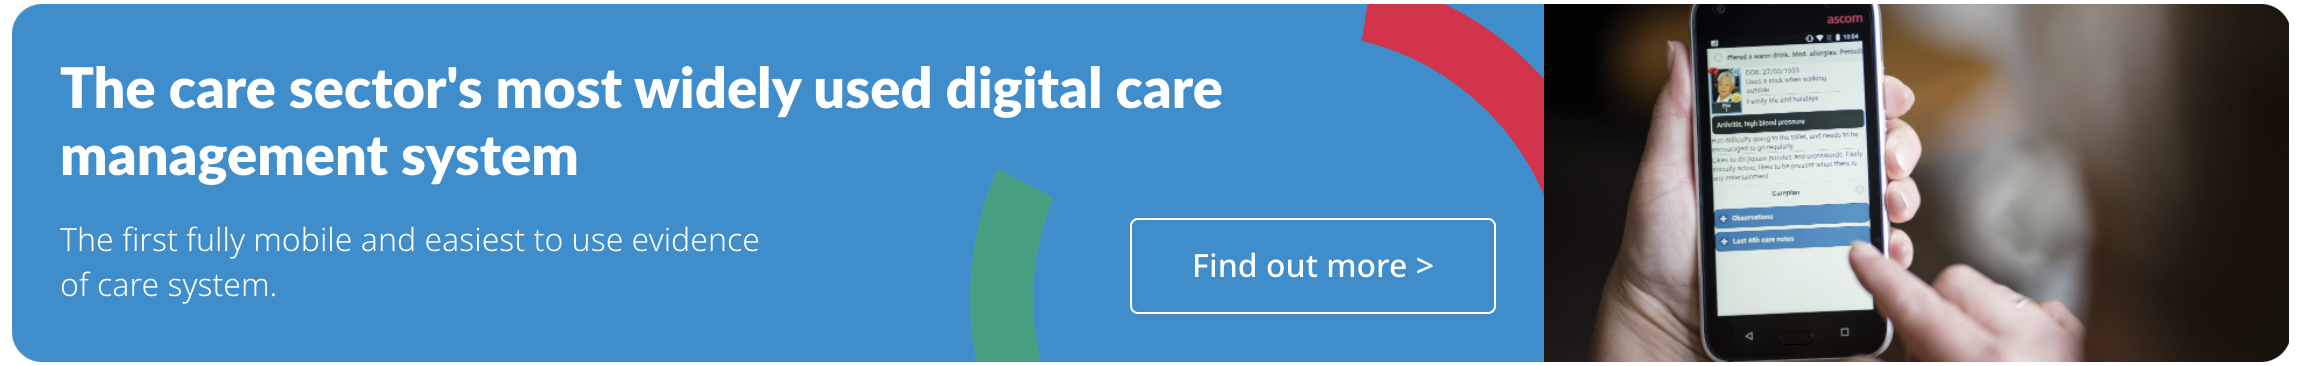 Care sector's most widely used digital care management system CTA